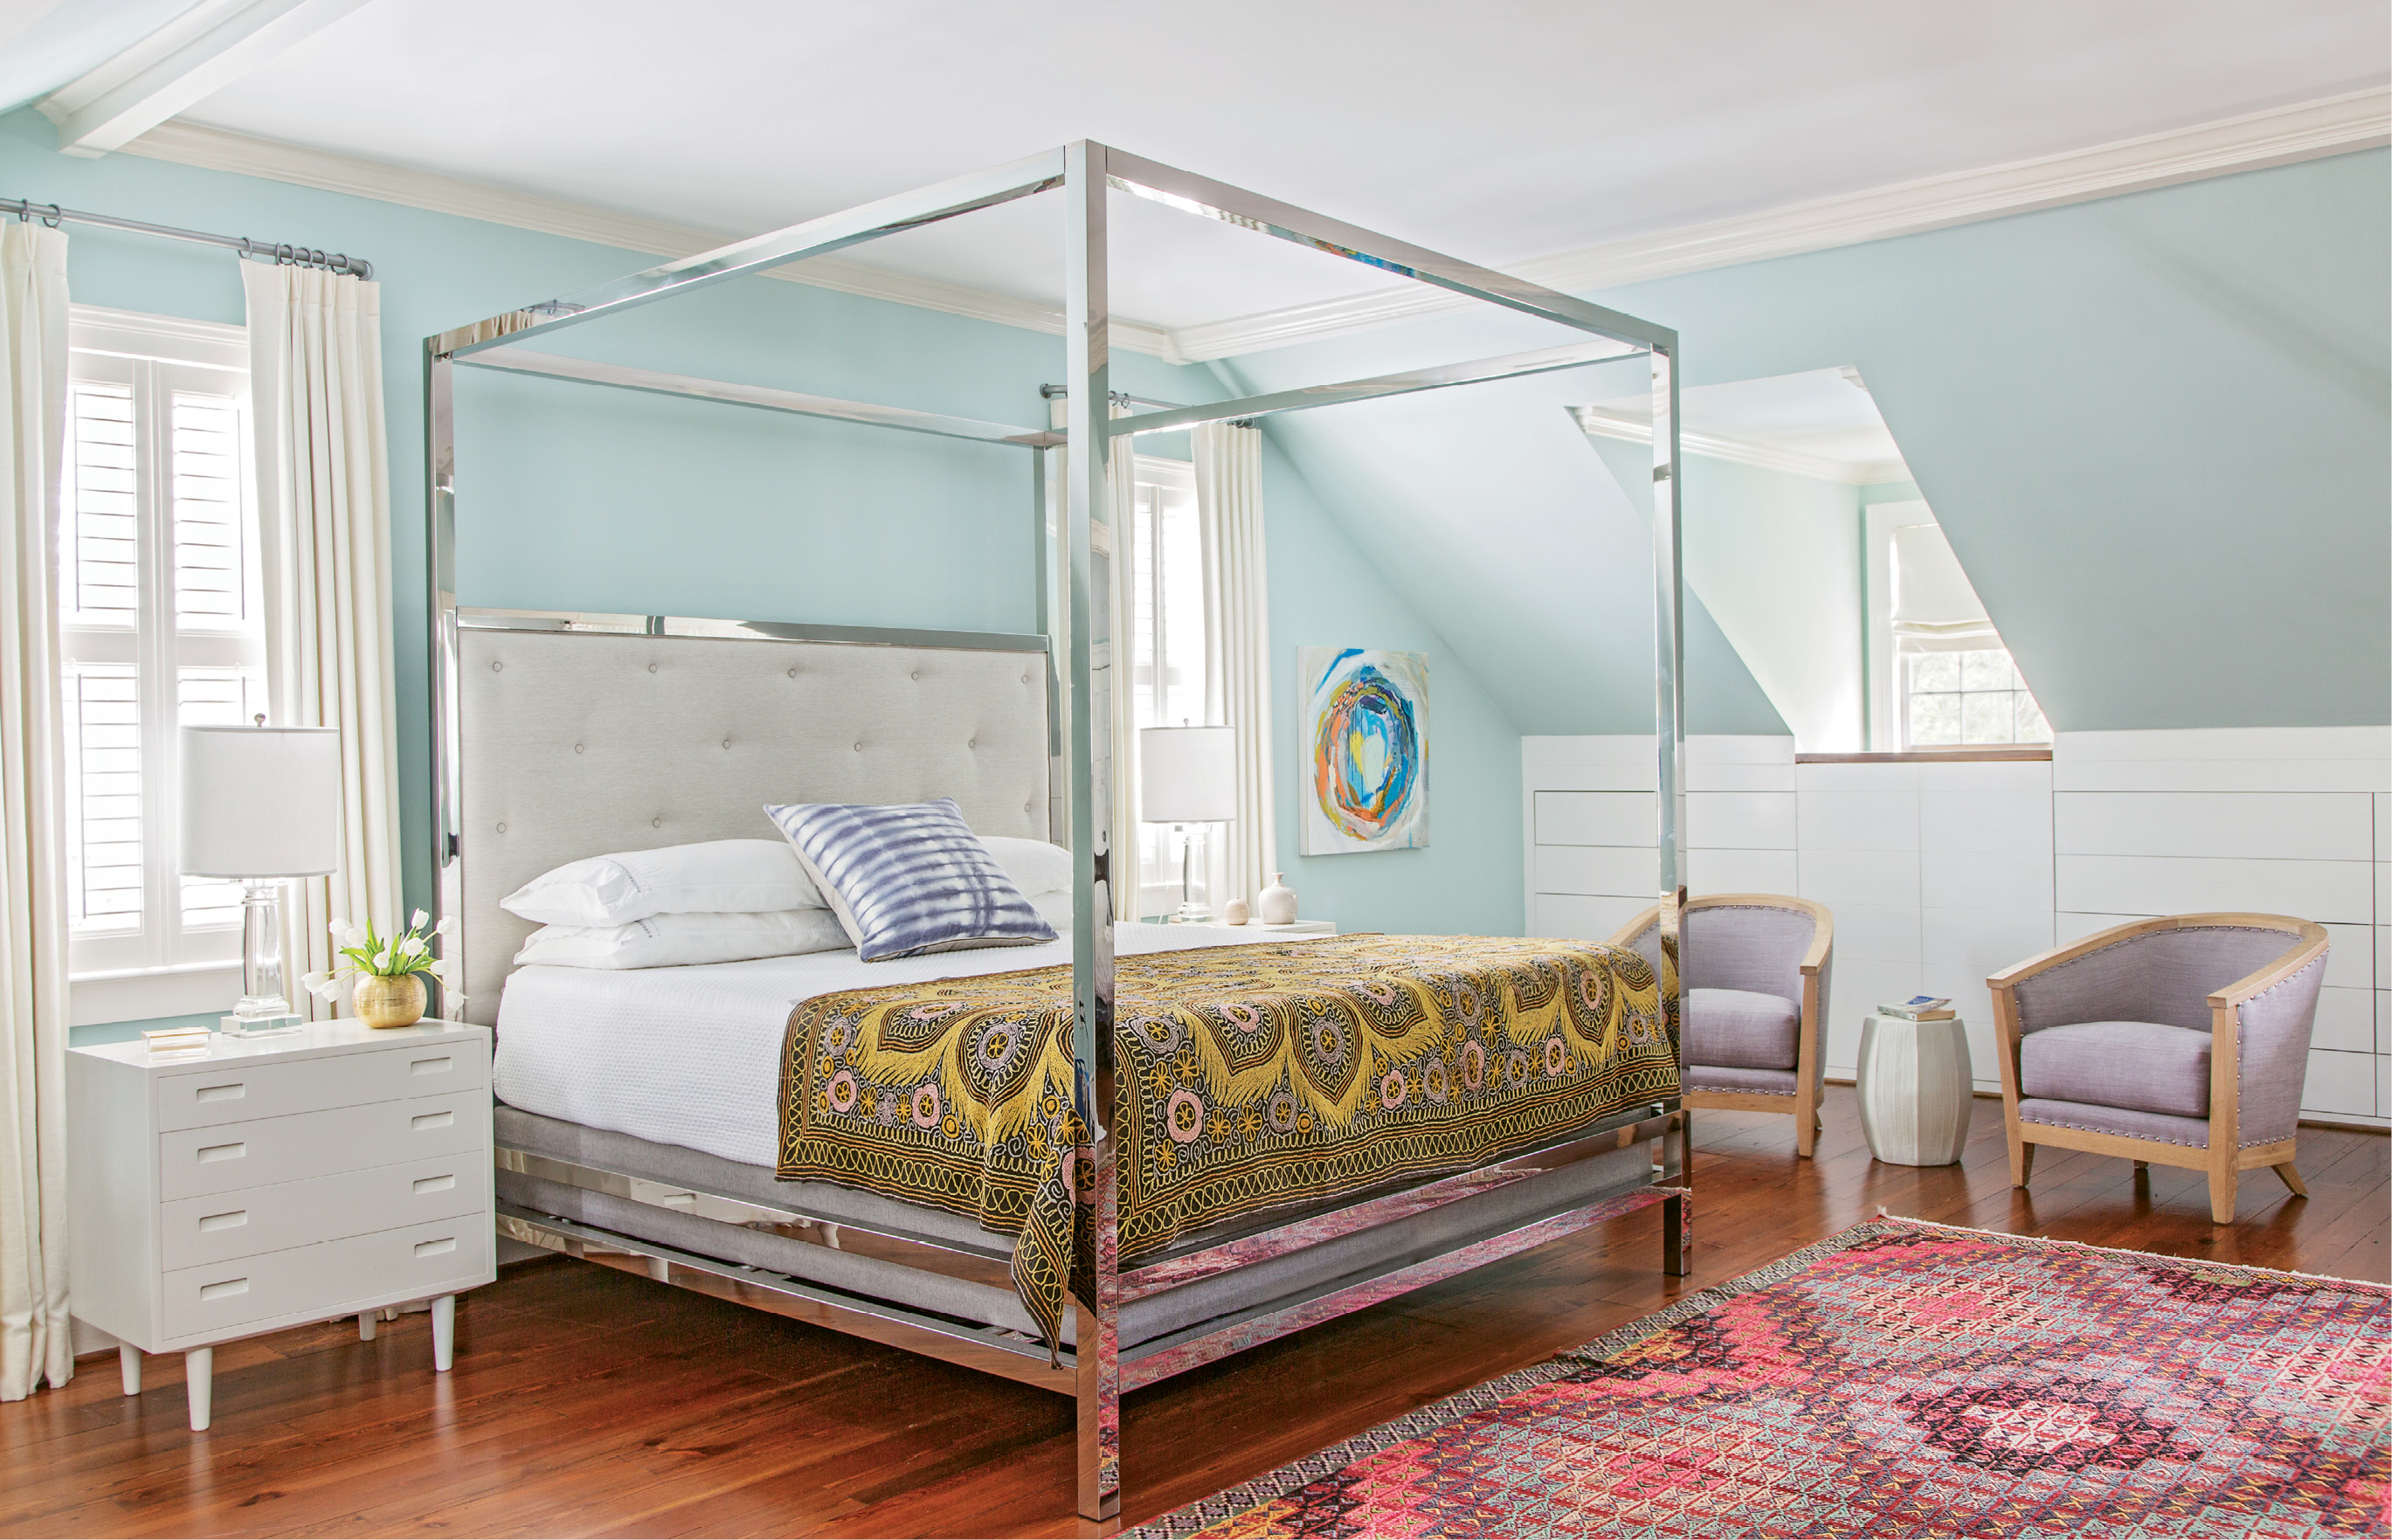 In the master bedroom, vintage textiles and mid-century nightstands add depth and texture to a streamlined canopy bed